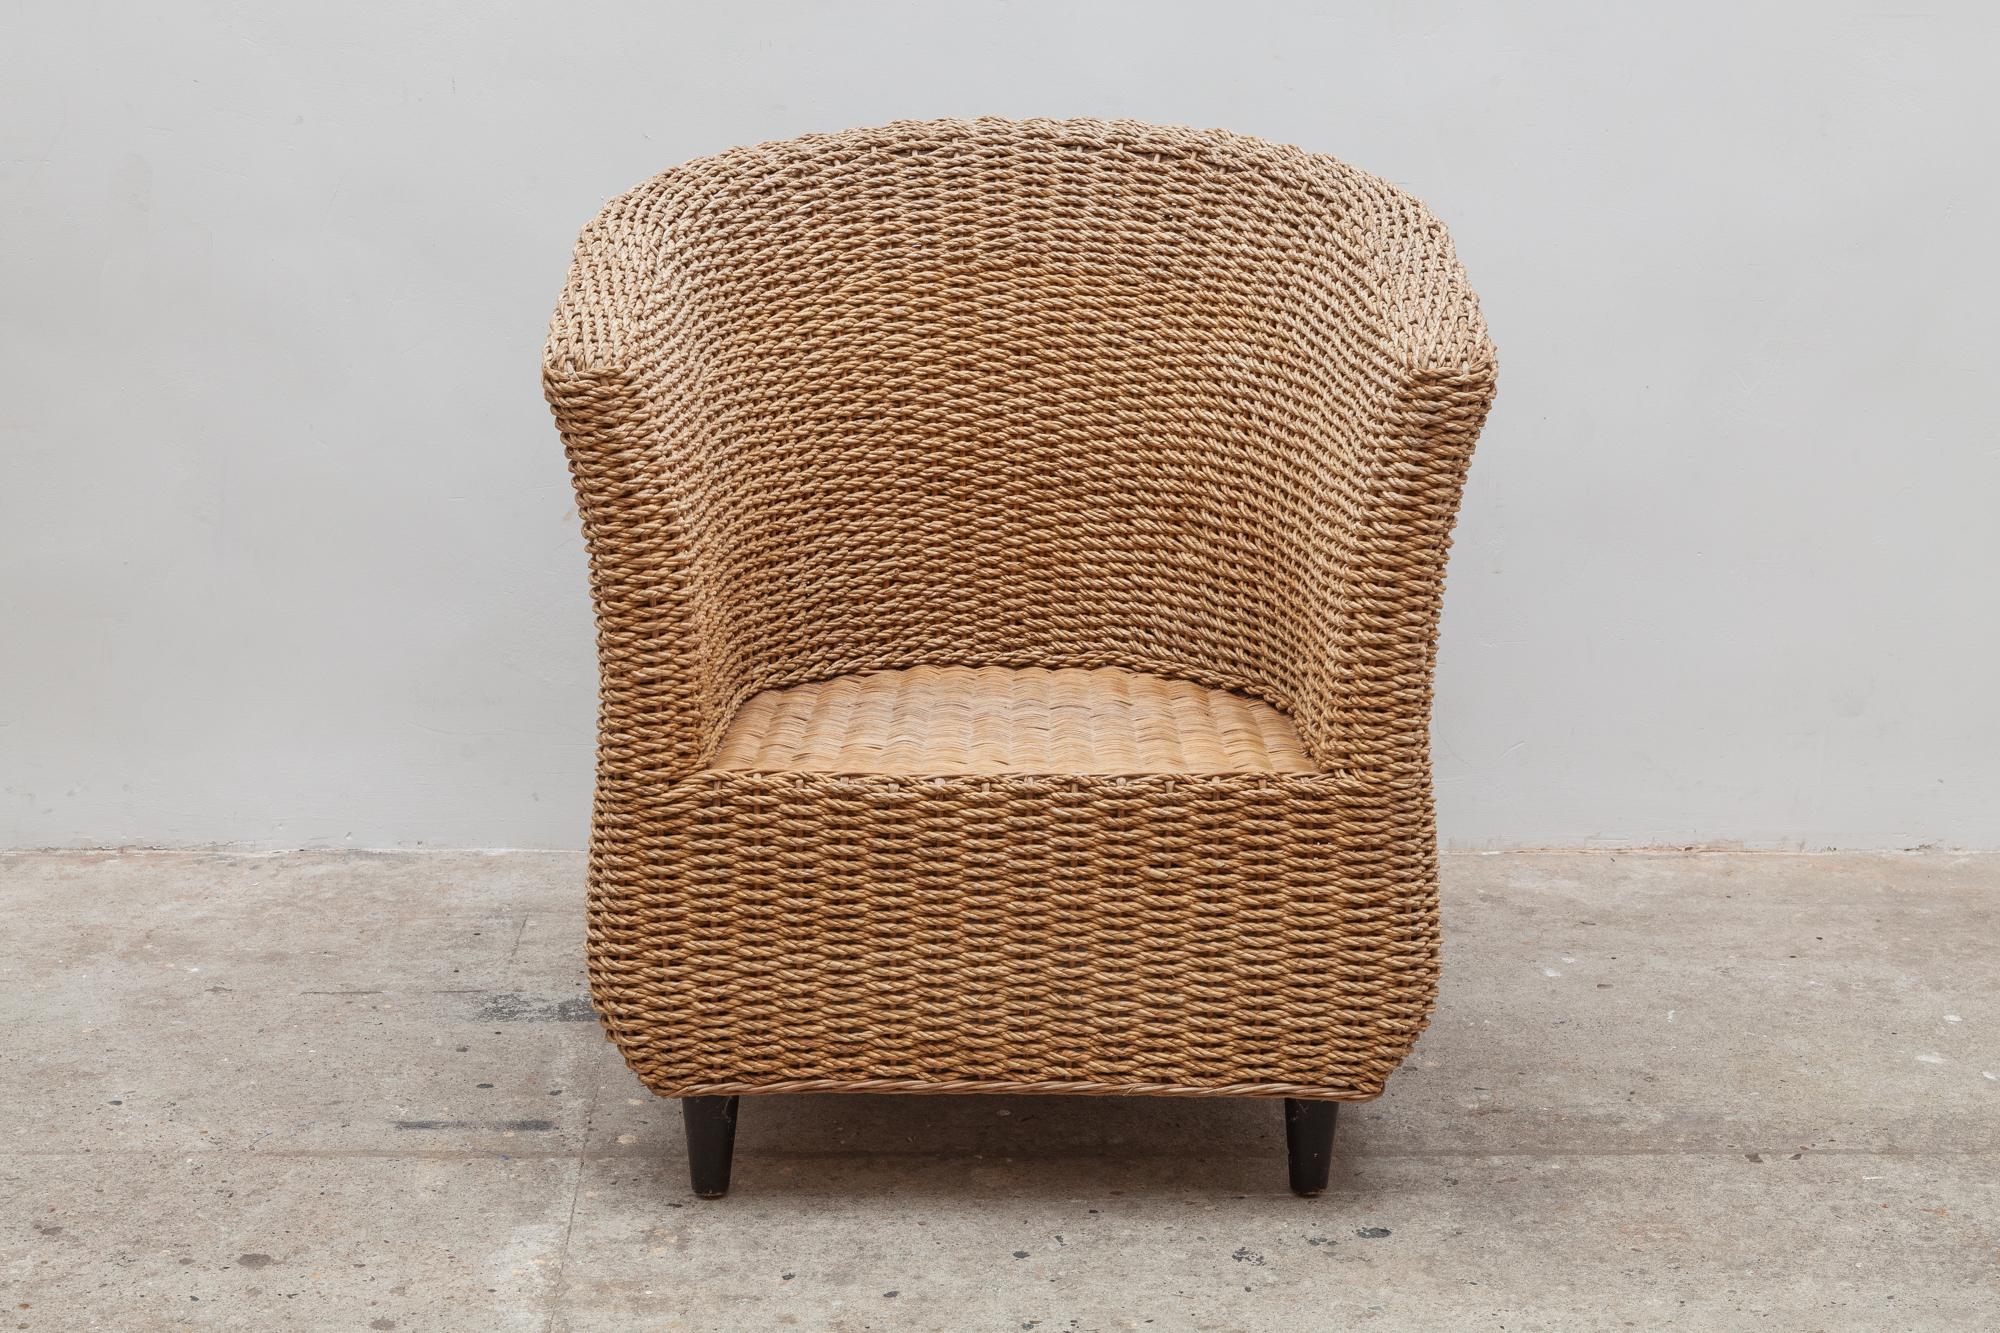 Vintage woven cord bucket chairs. U-shaped design with wooden legs. Dimensions 75 W x 78 H x 75 D cm. Perfect for the home or covered outdoor patio.